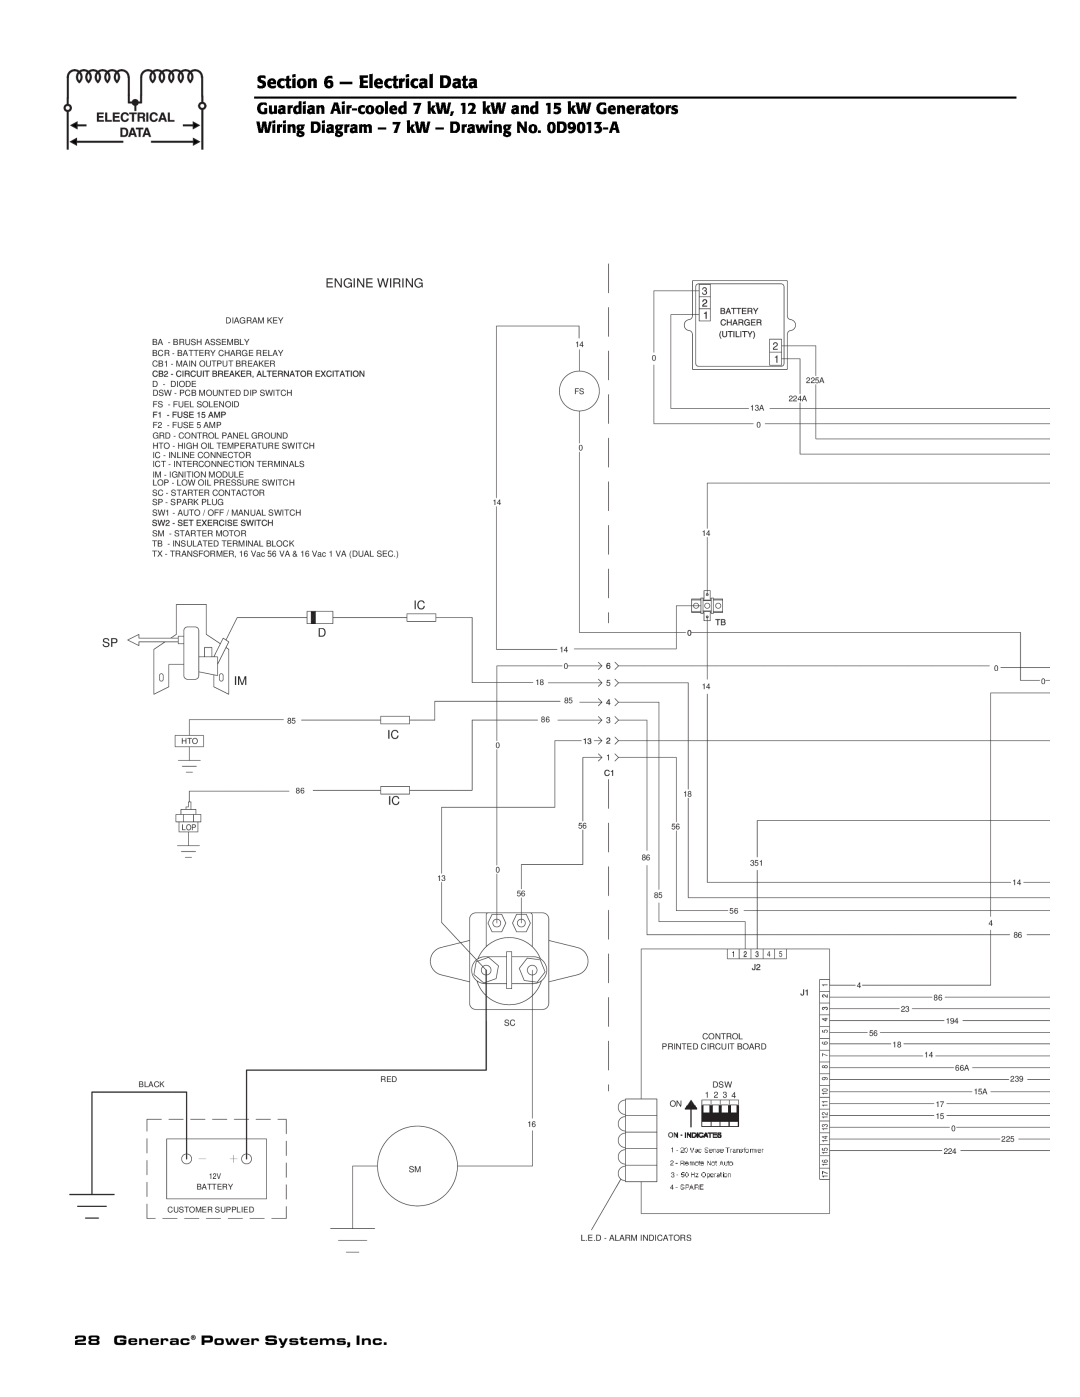 Generac 04389-1, 04456-1, 04390-1 owner manual Electrical Data, Wiring Diagram - 7 kW - Drawing No. 0D9013-A 